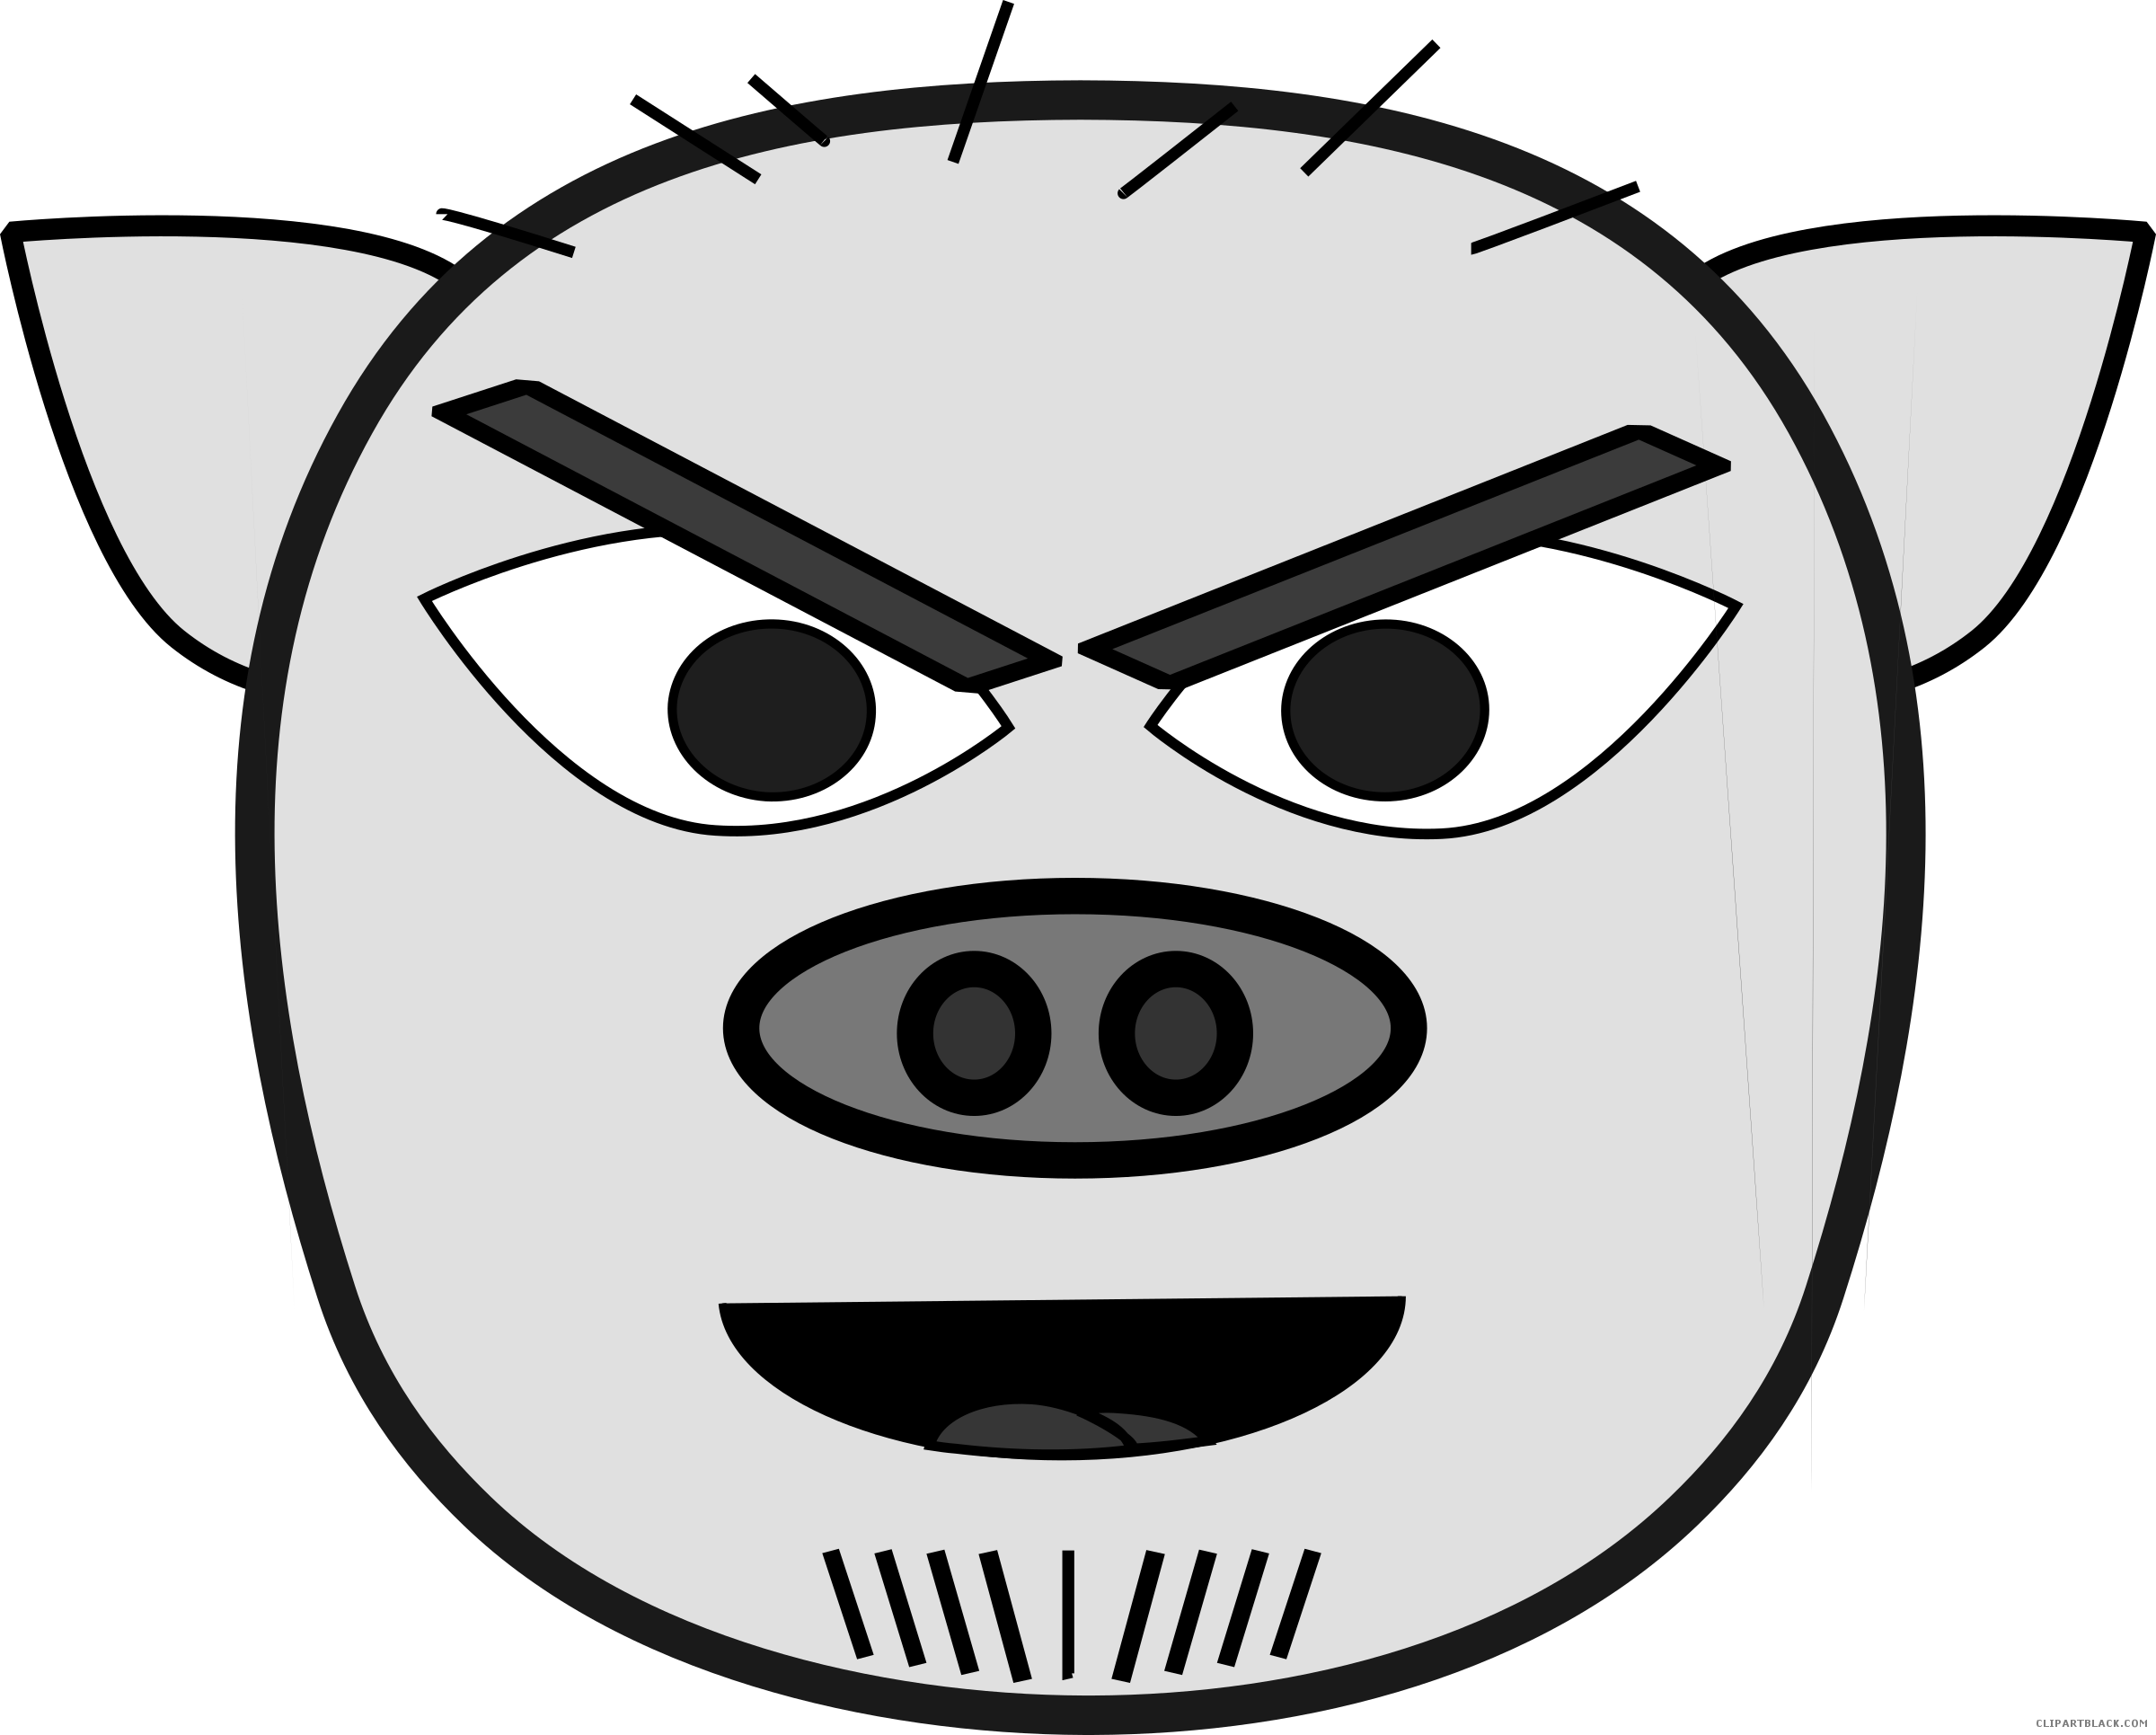 Pig High Quality Animal Free Black White Clipart Images - Pig High Quality Animal Free Black White Clipart Images (2400x1931)